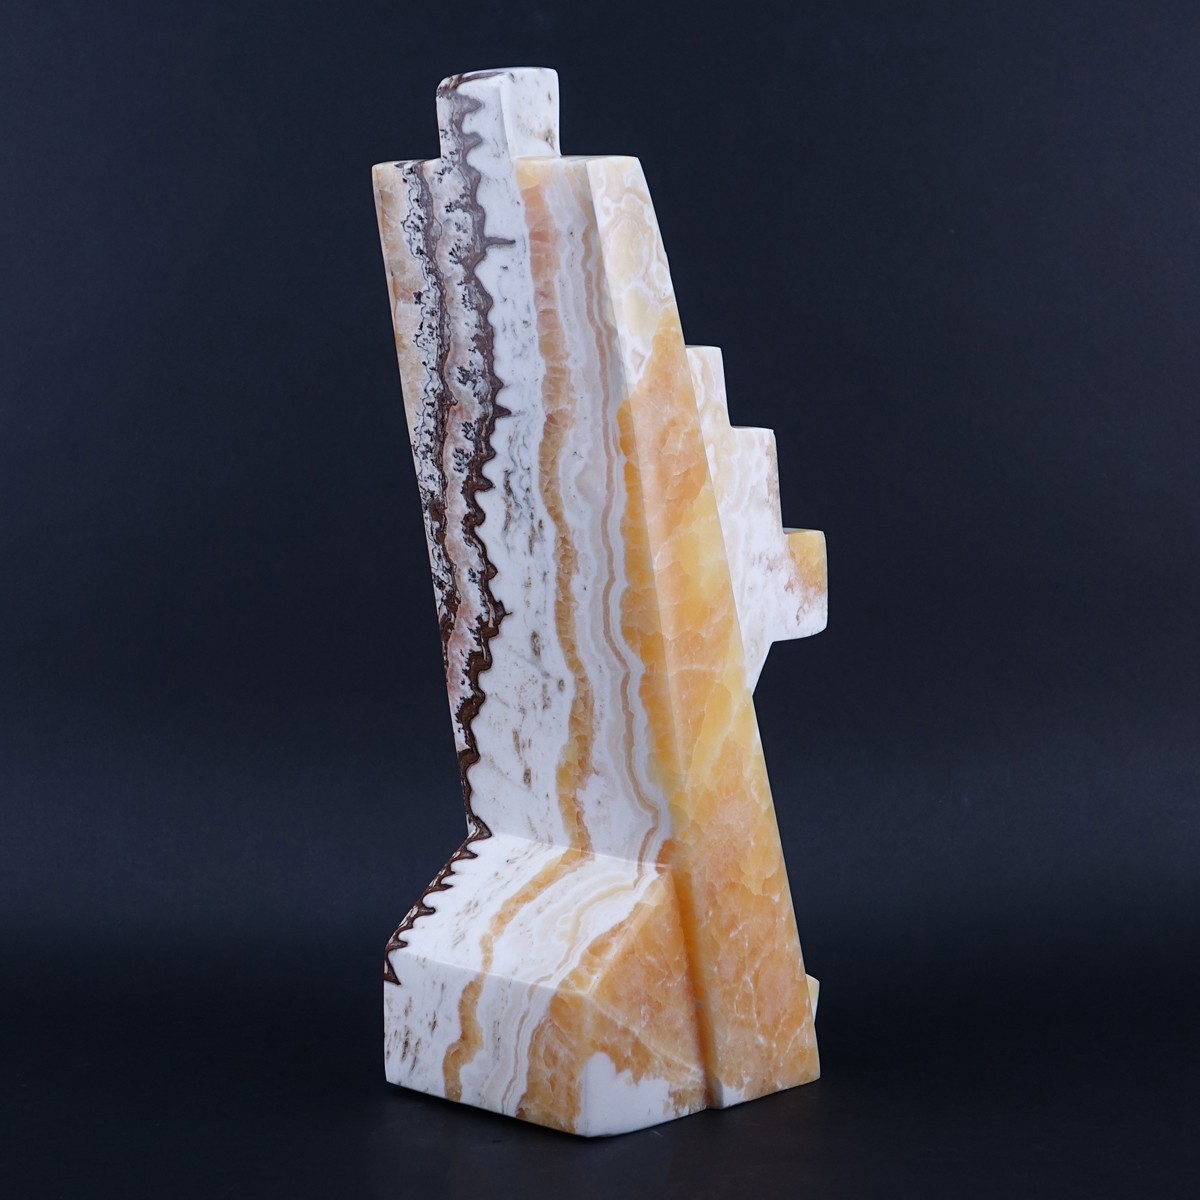 Large Banded Onyx Geometric Free Form Sculpture Signed Bernie M.